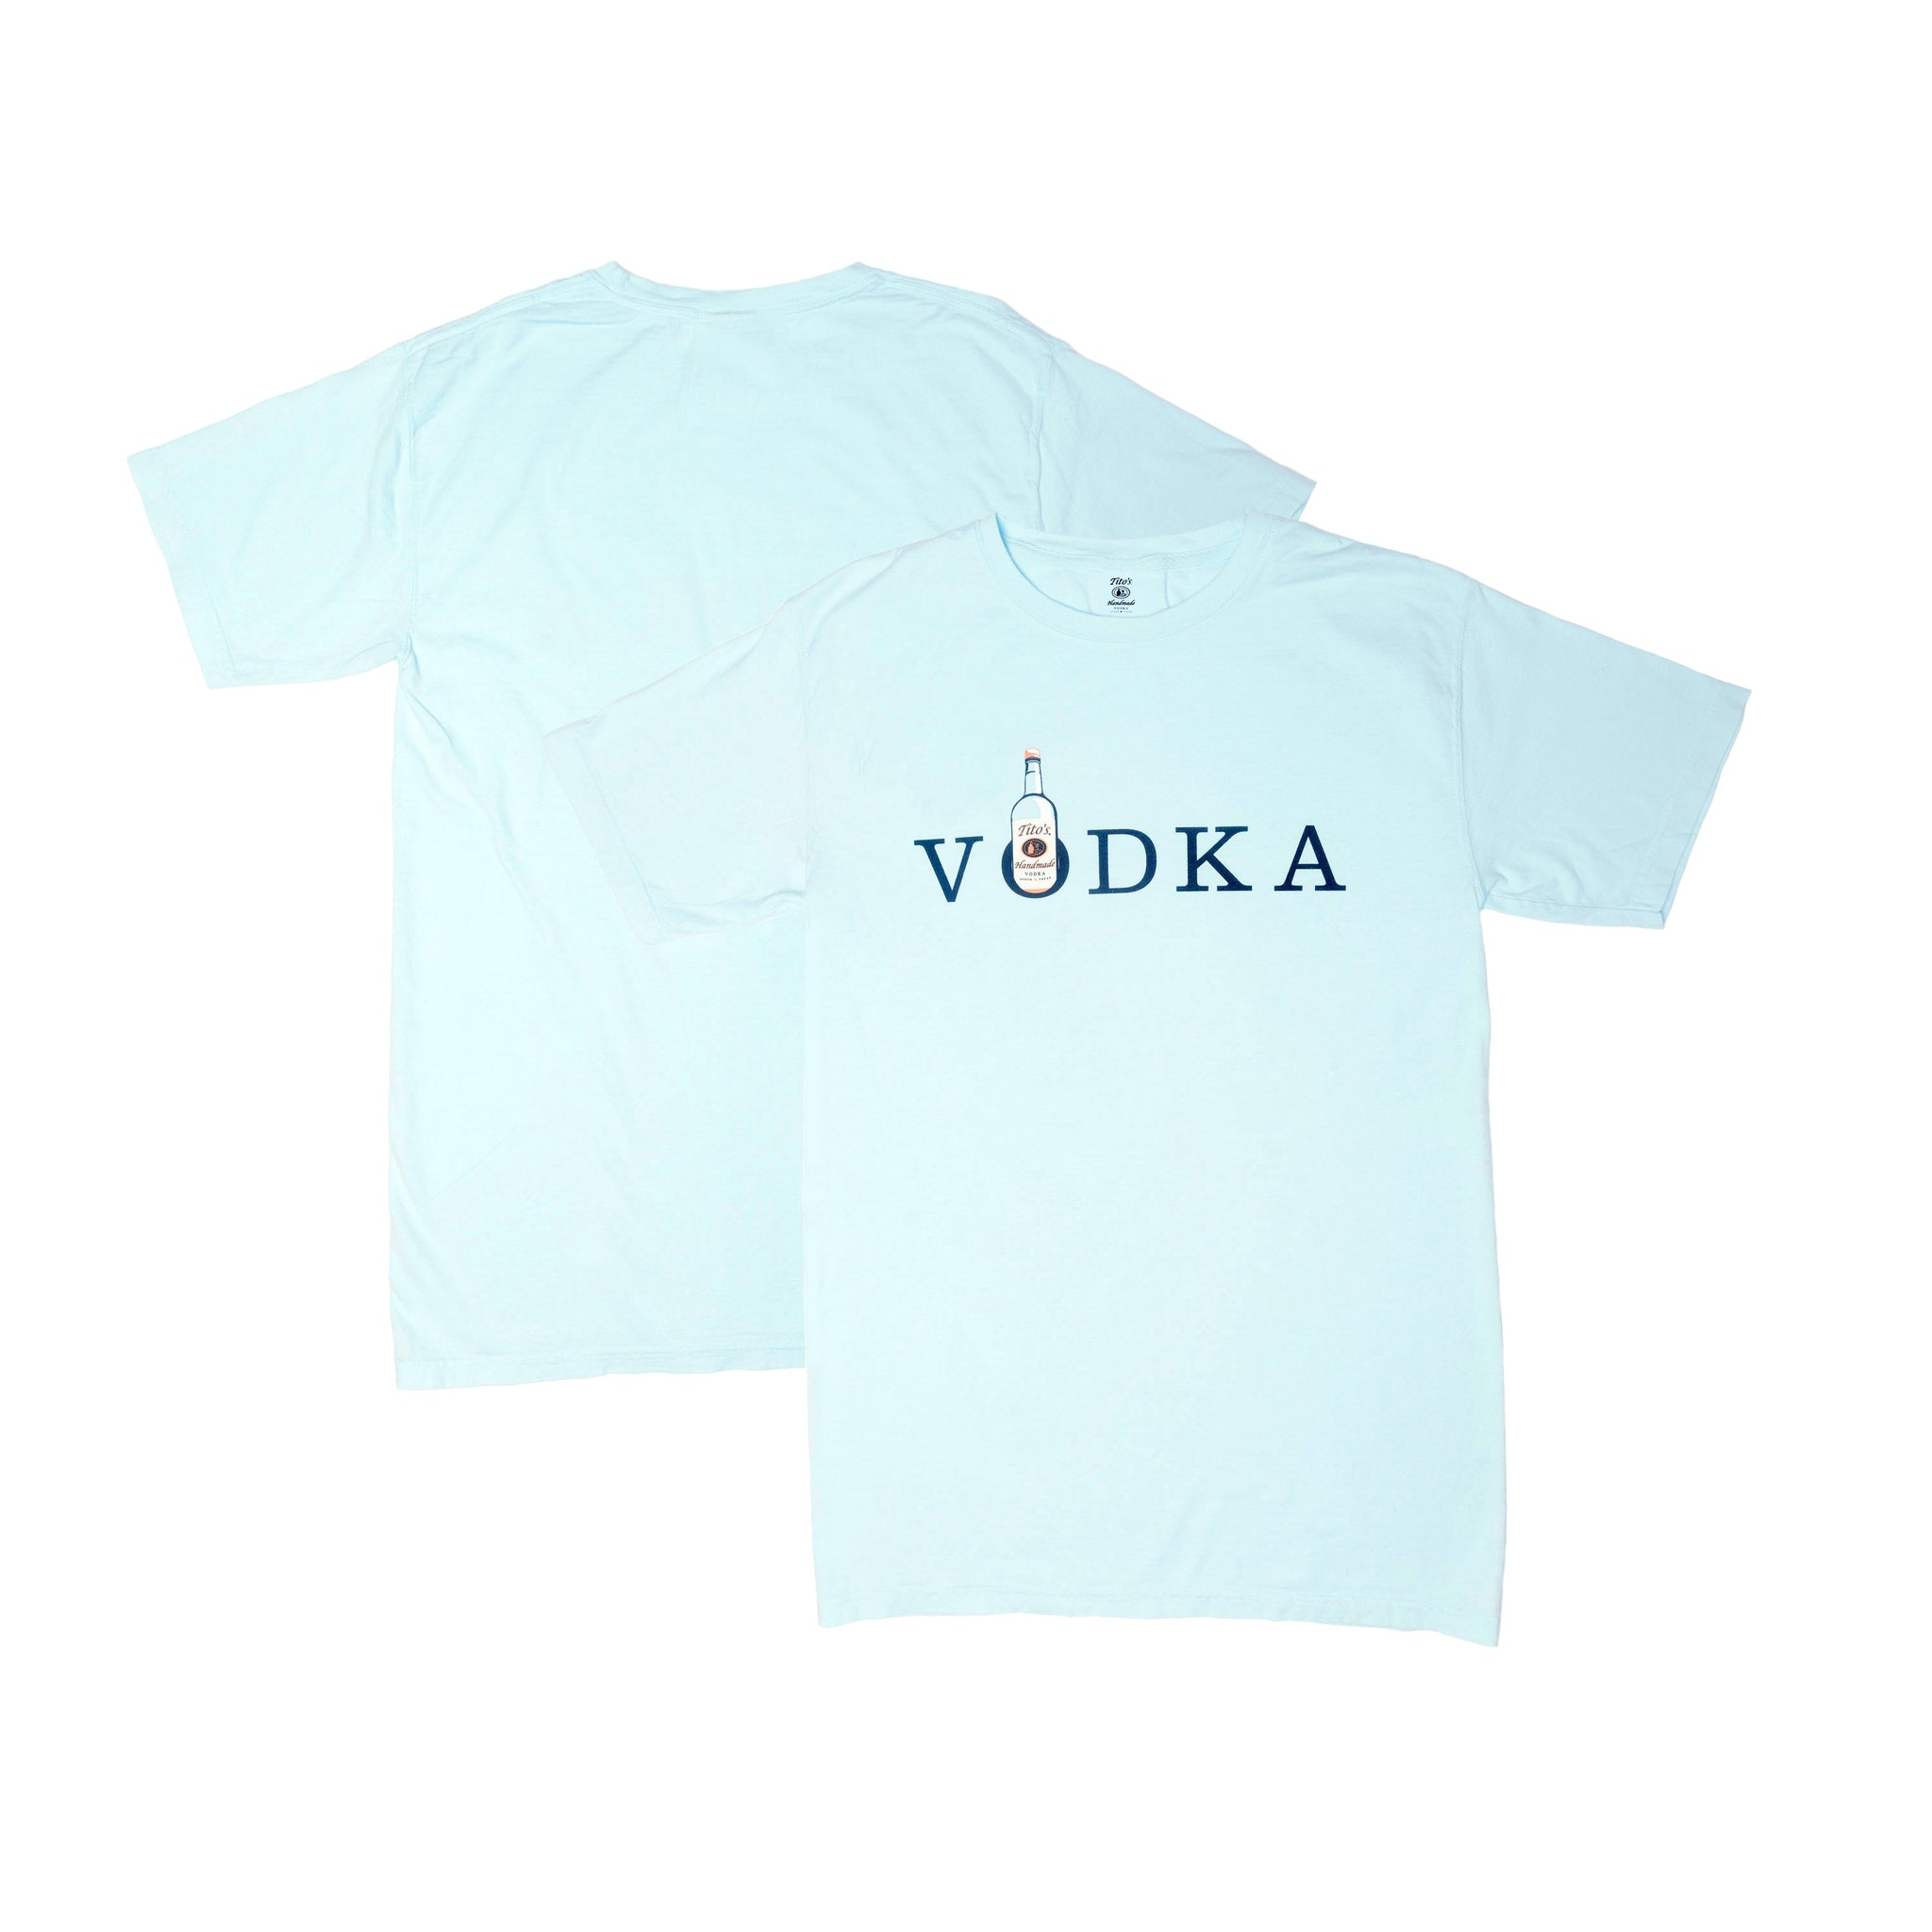 Front and back of light blue short-sleeved t-shirt with VODKA on the front with a Tito's bottle inside the letter O